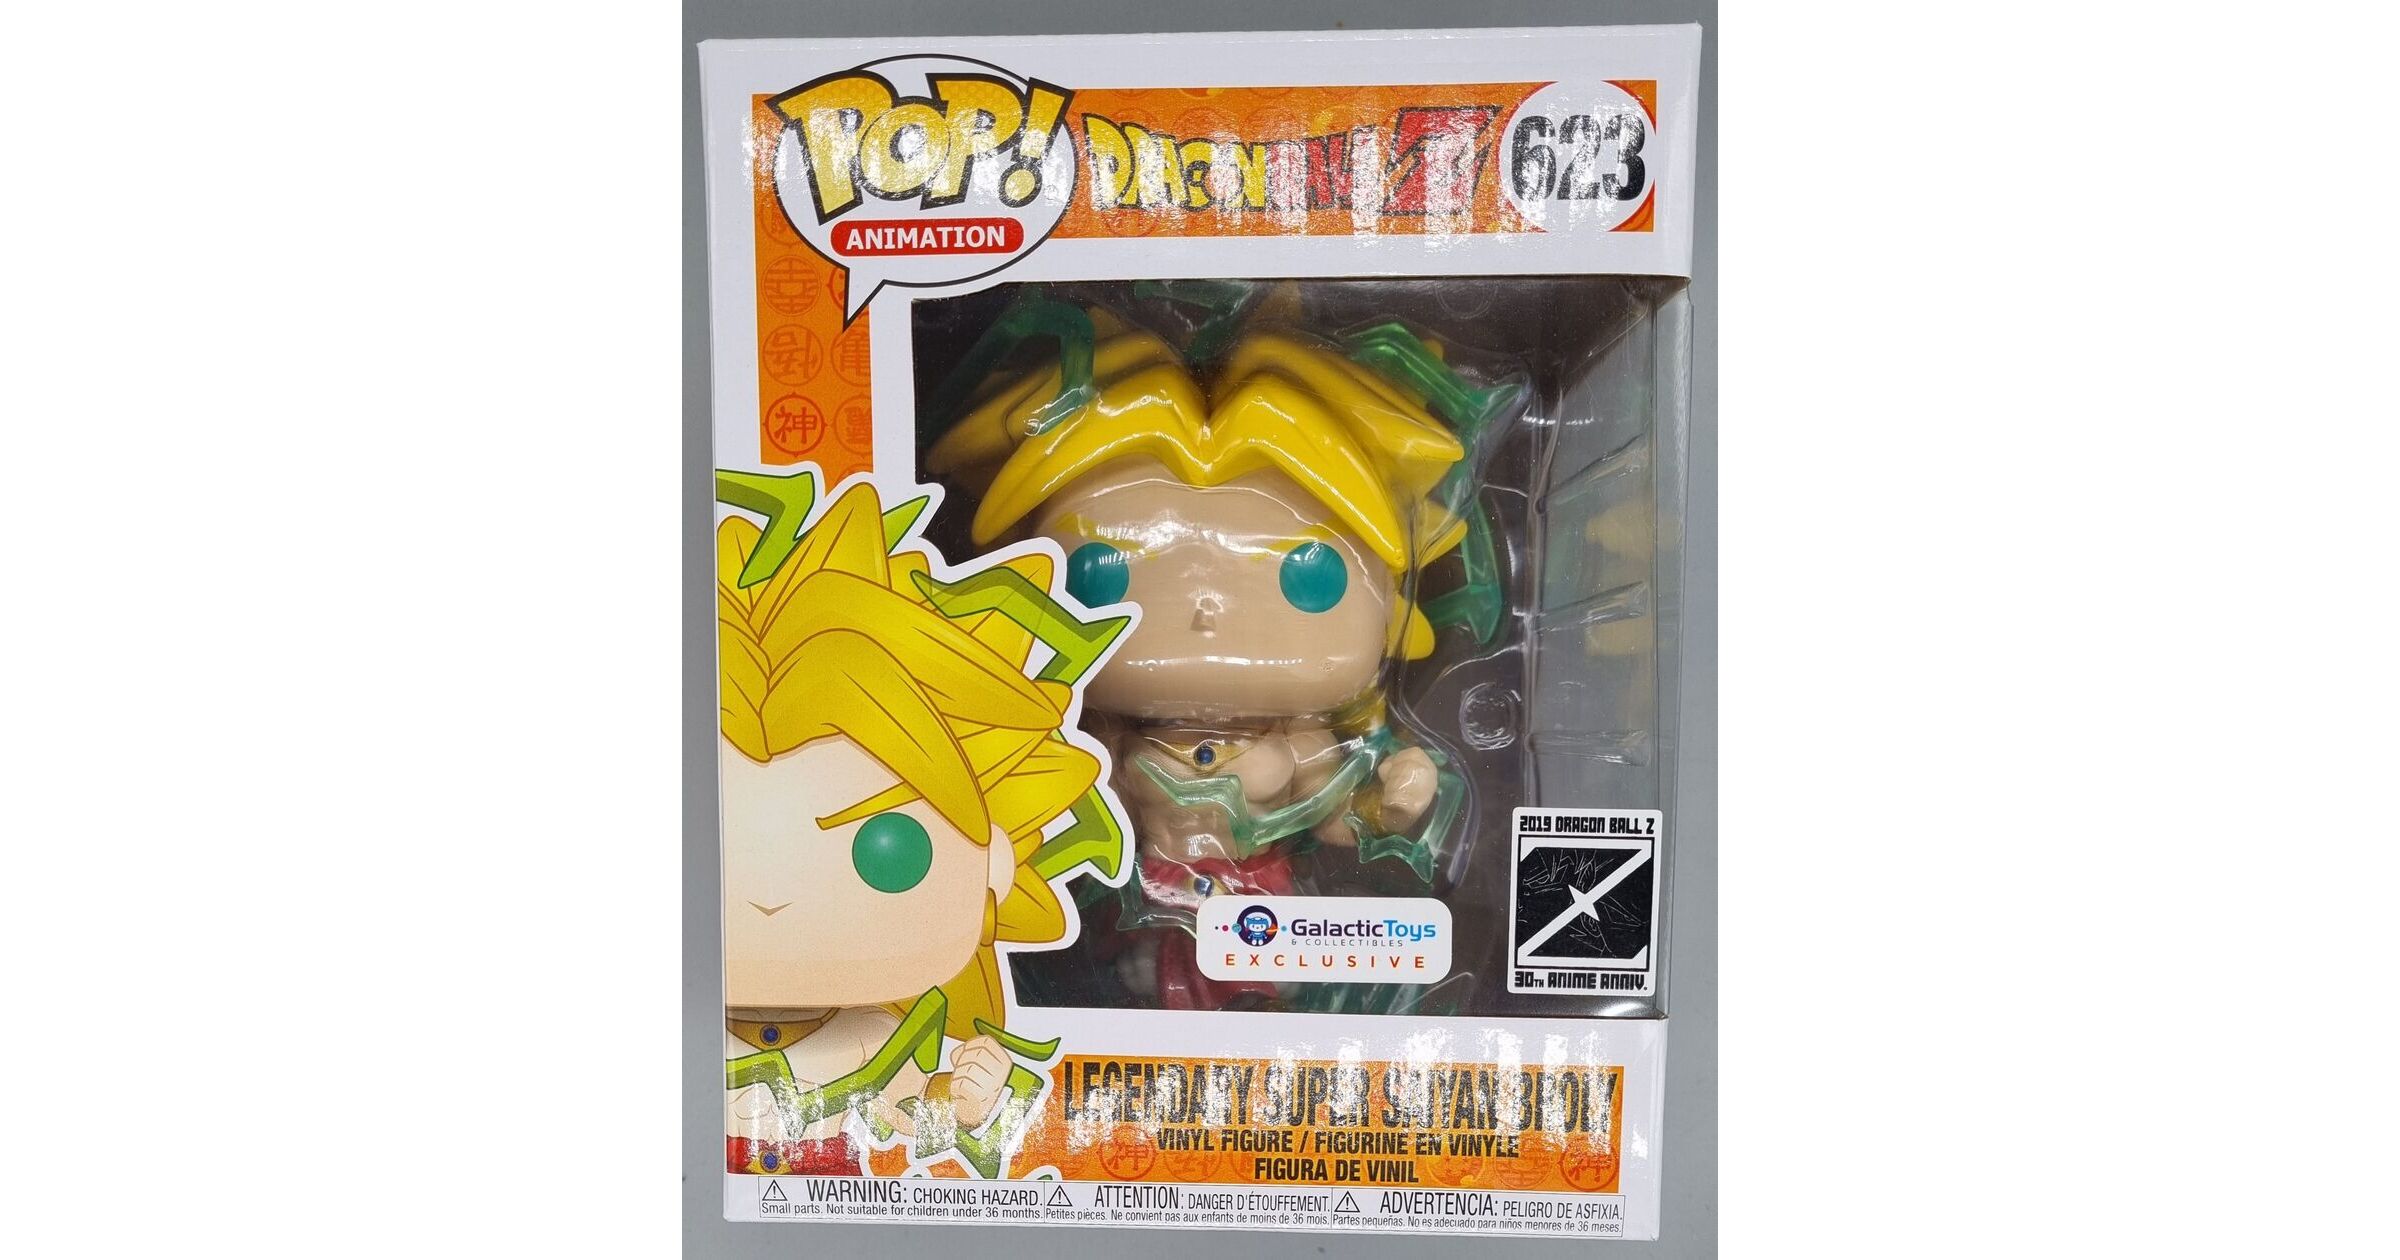 Funko Pop! Animation Dragonball Z Legendary Super Saiyan Broly 30th Anime  Anniversary Galactic Toys Exclusive 6 inch Figure #623 - US